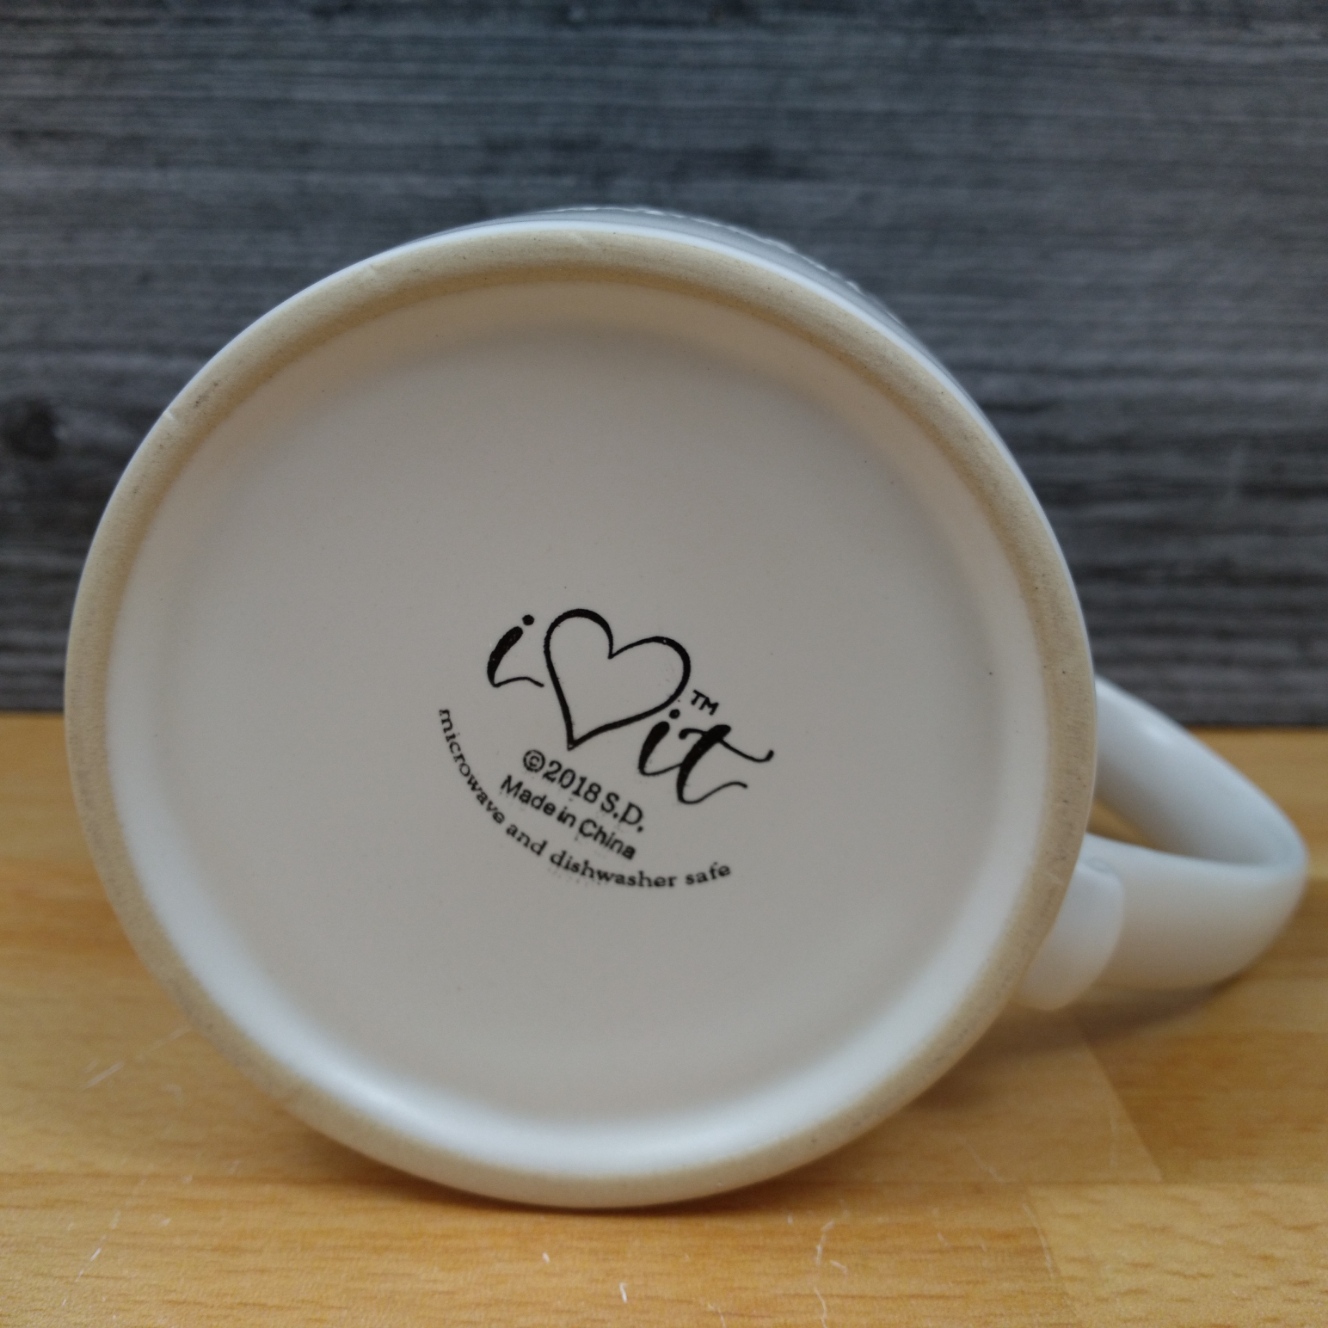 This Mom Inspirational Saying Coffee Mug 16oz 473ml Embossed Tea Cup by Blue Sky is made with love by Premier Homegoods! Shop more unique gift ideas today with Spots Initiatives, the best way to support creators.